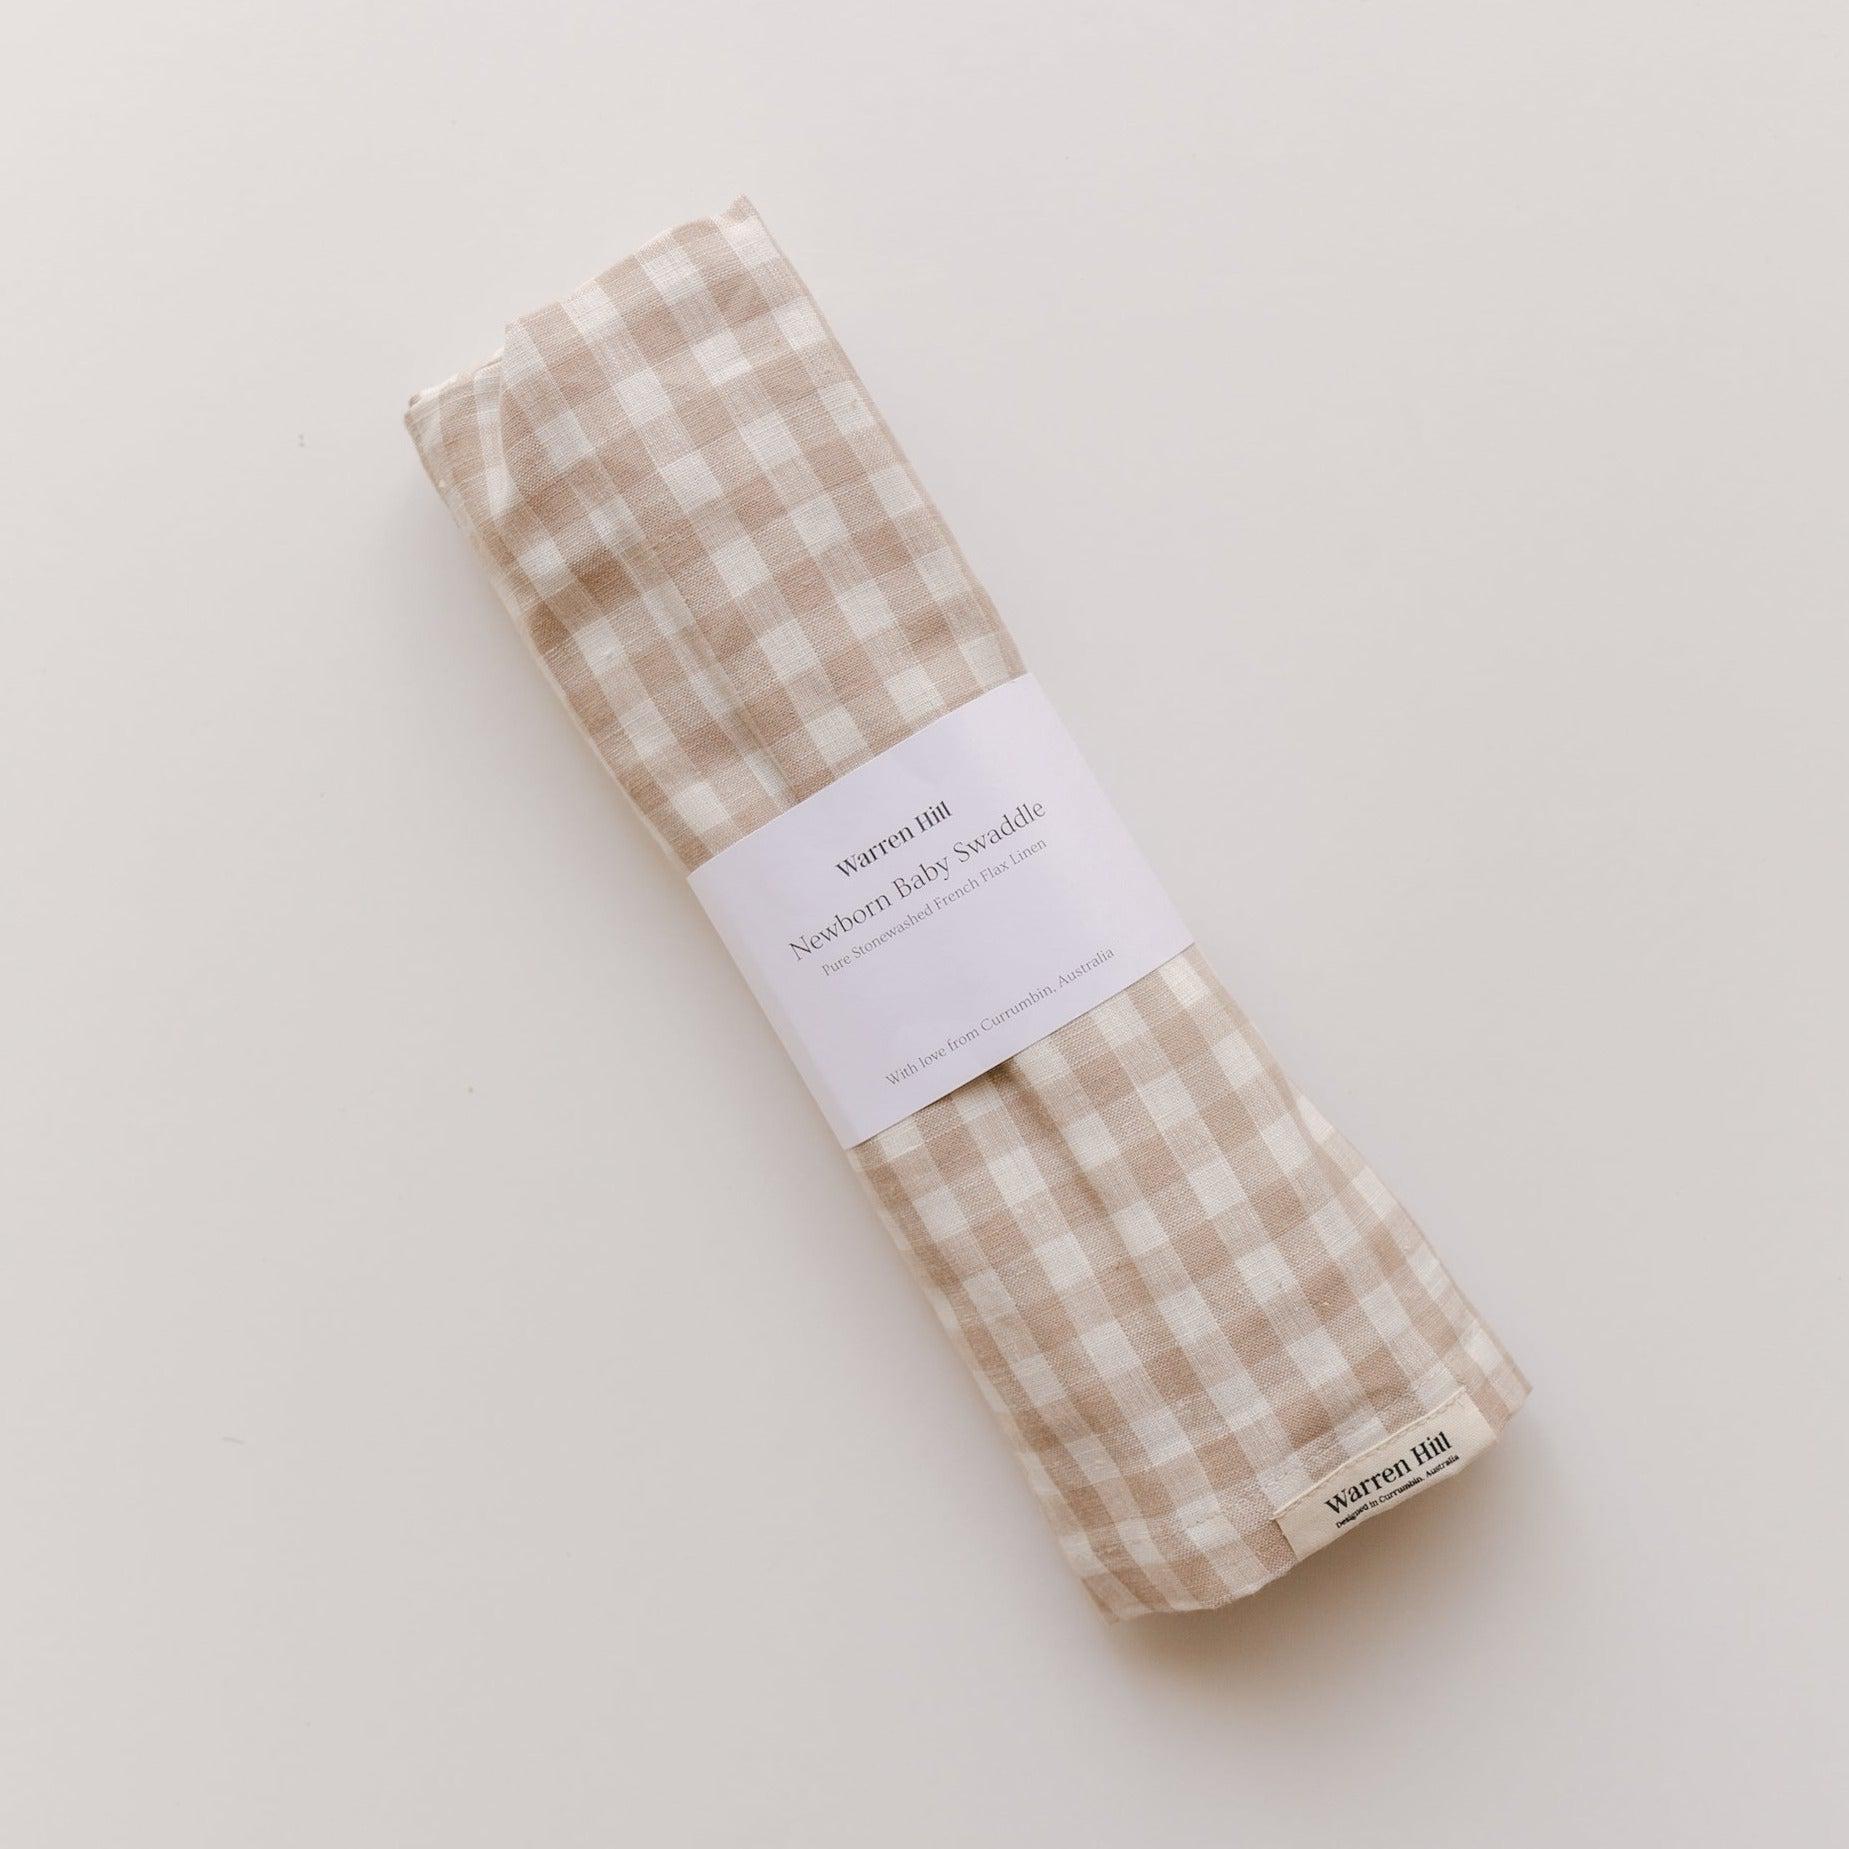 A beige and white gingham Warren Hill French linen napkin on a white surface.